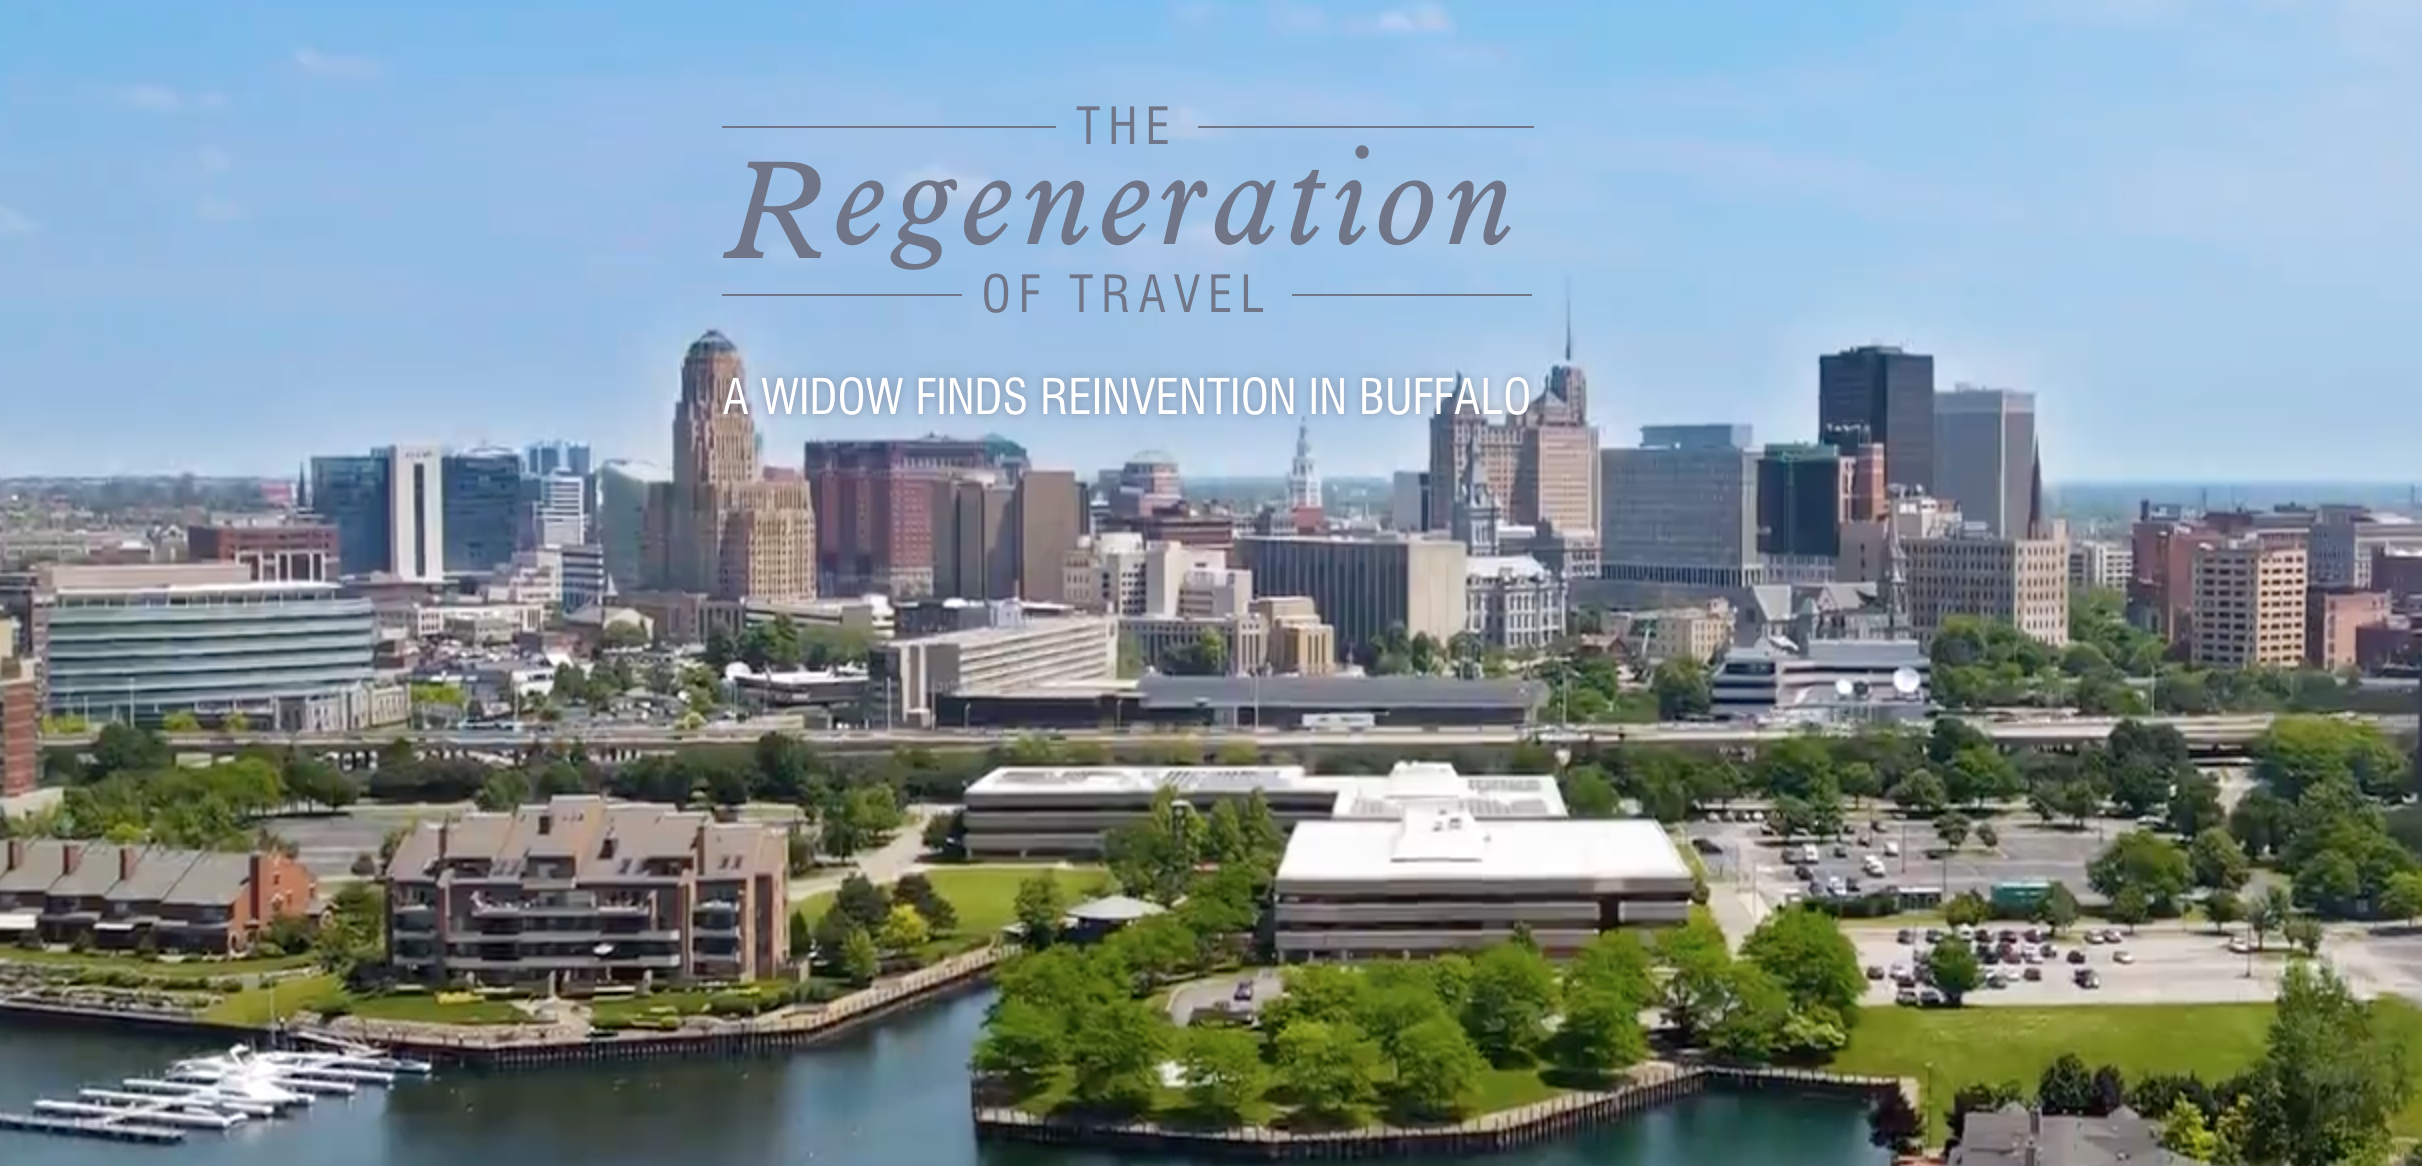 The Regeneration of Travel: A Widow Finds Reinvention In Buffalo – Buffalo